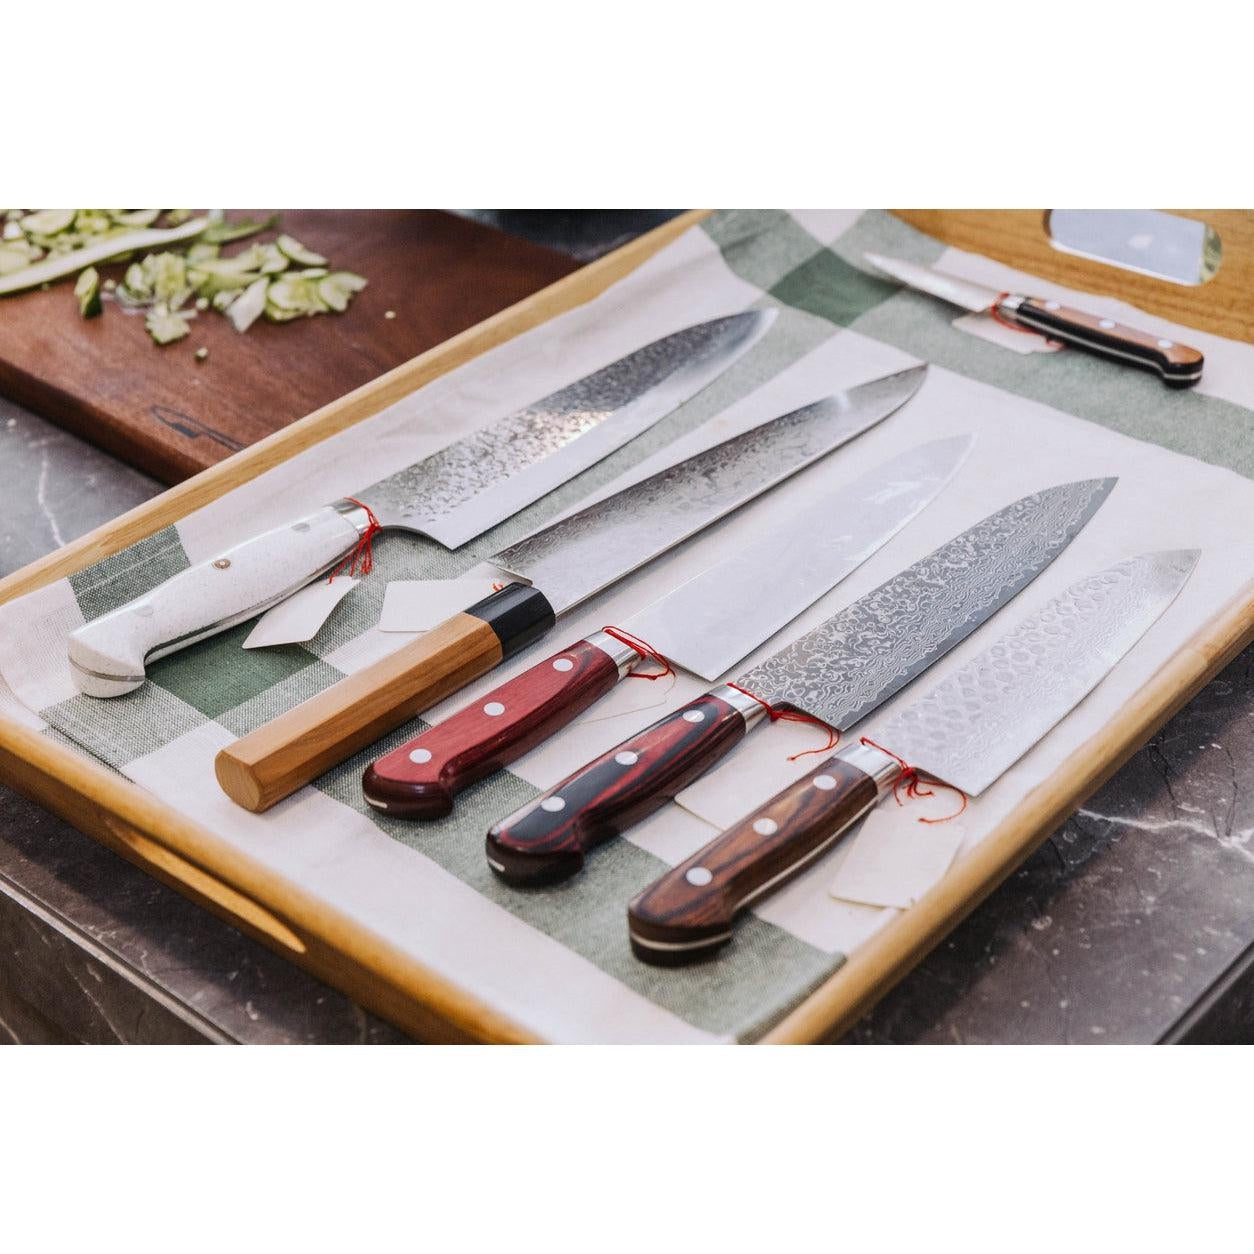 http://int.japanesetaste.com/cdn/shop/articles/14-types-of-japanese-knives-you-need-to-have-in-your-kitchen.jpg?v=1685798618&width=5760